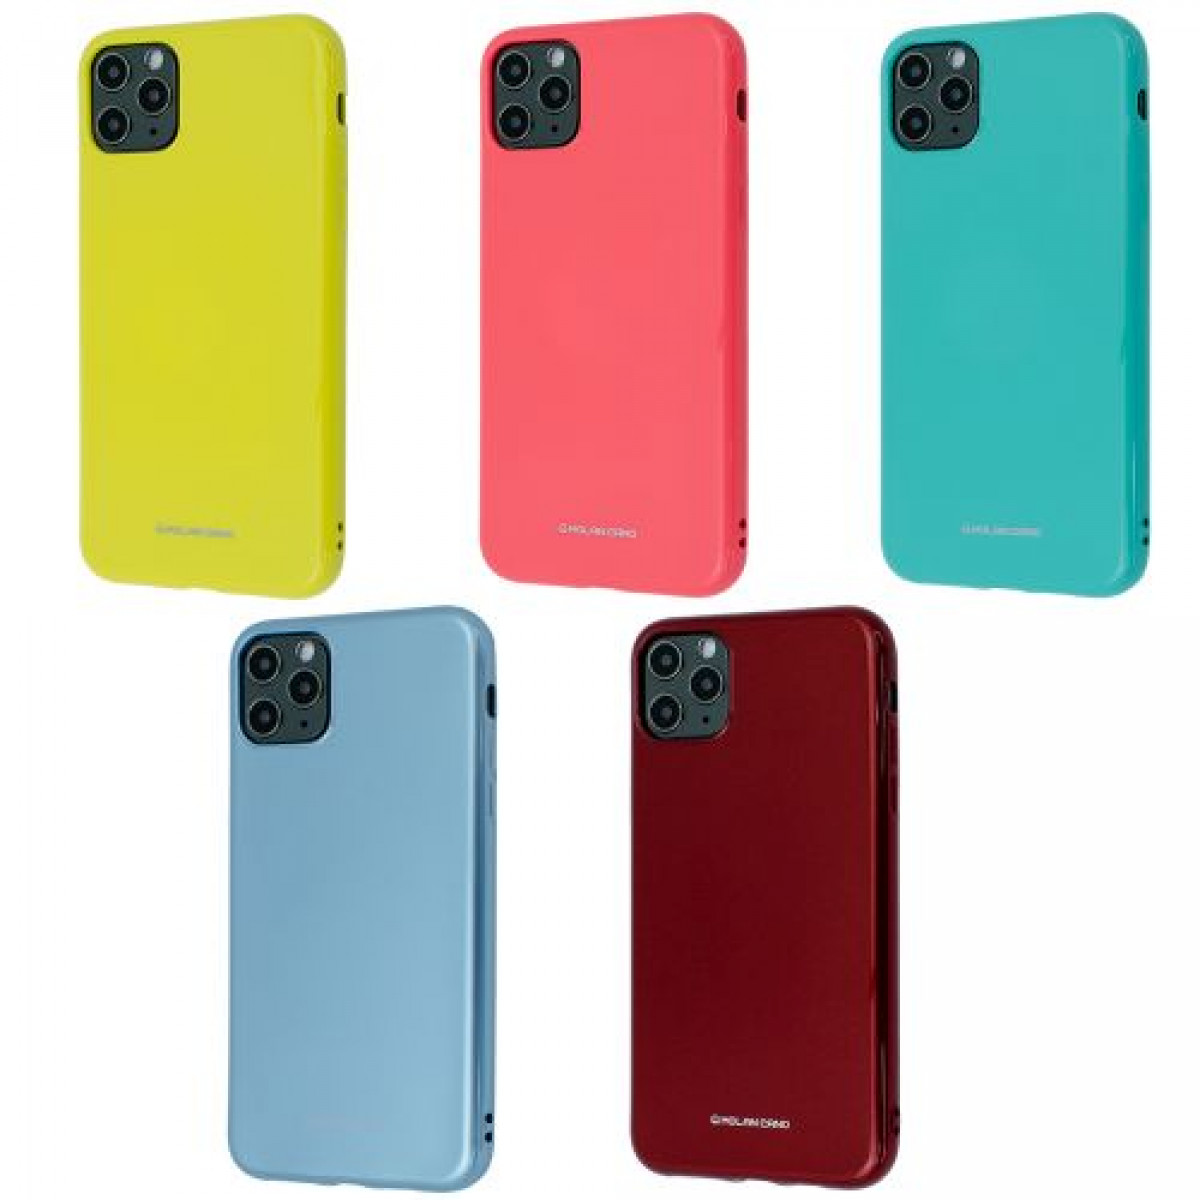 Molan Cano Pearl Jelly Series Case for iPhone 11 Pro